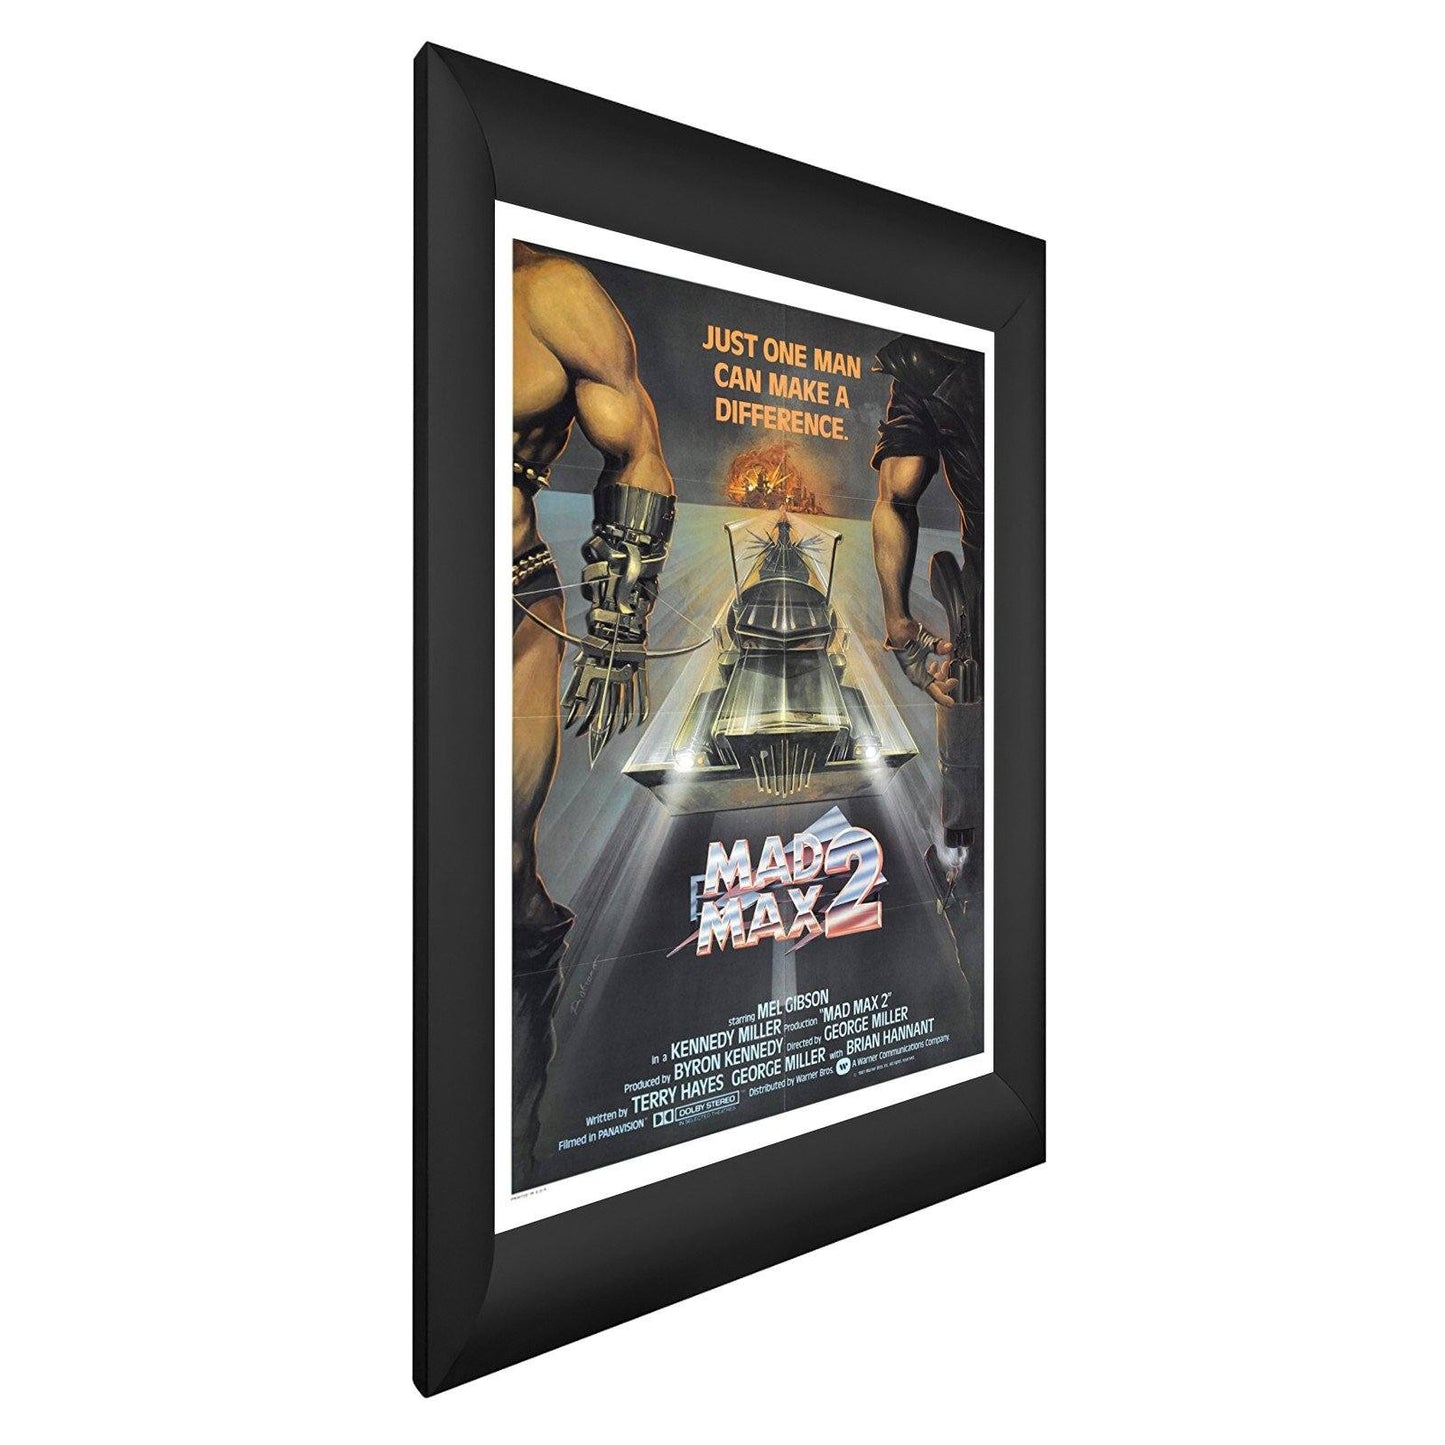 Load image into Gallery viewer, 27x41 Black SnapeZo® Snap Frame - 2.2&amp;quot; Profile
